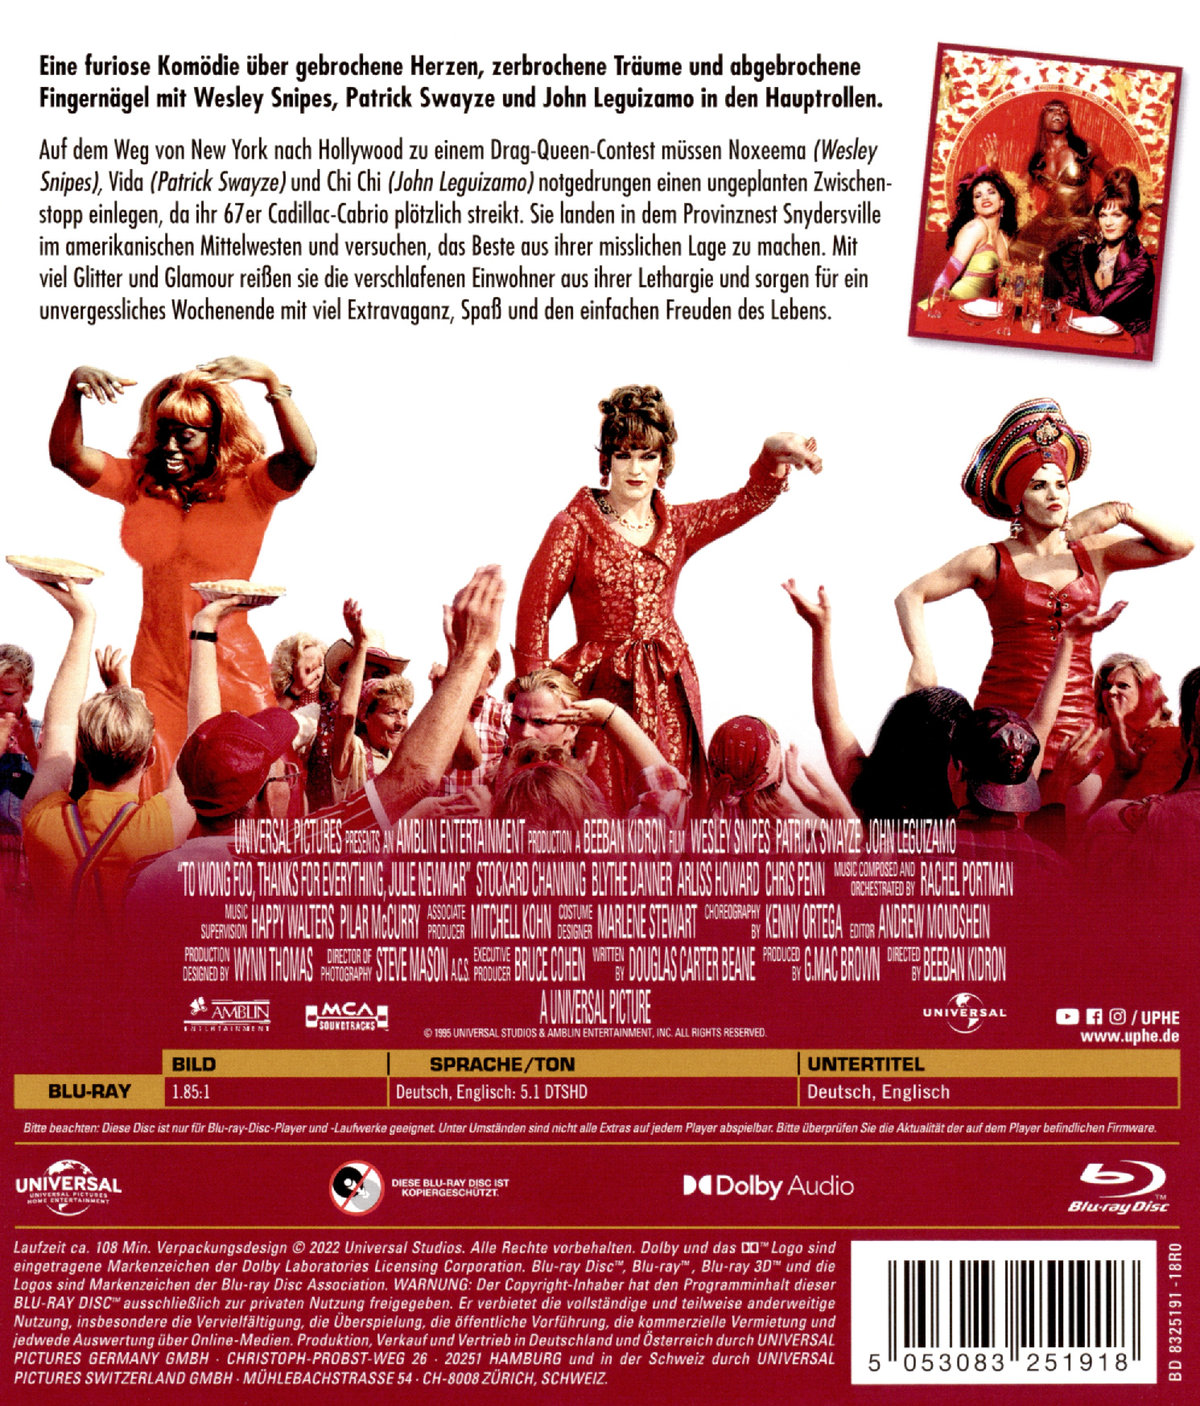 To Wong Foo, Thanks For Everything (blu-ray)